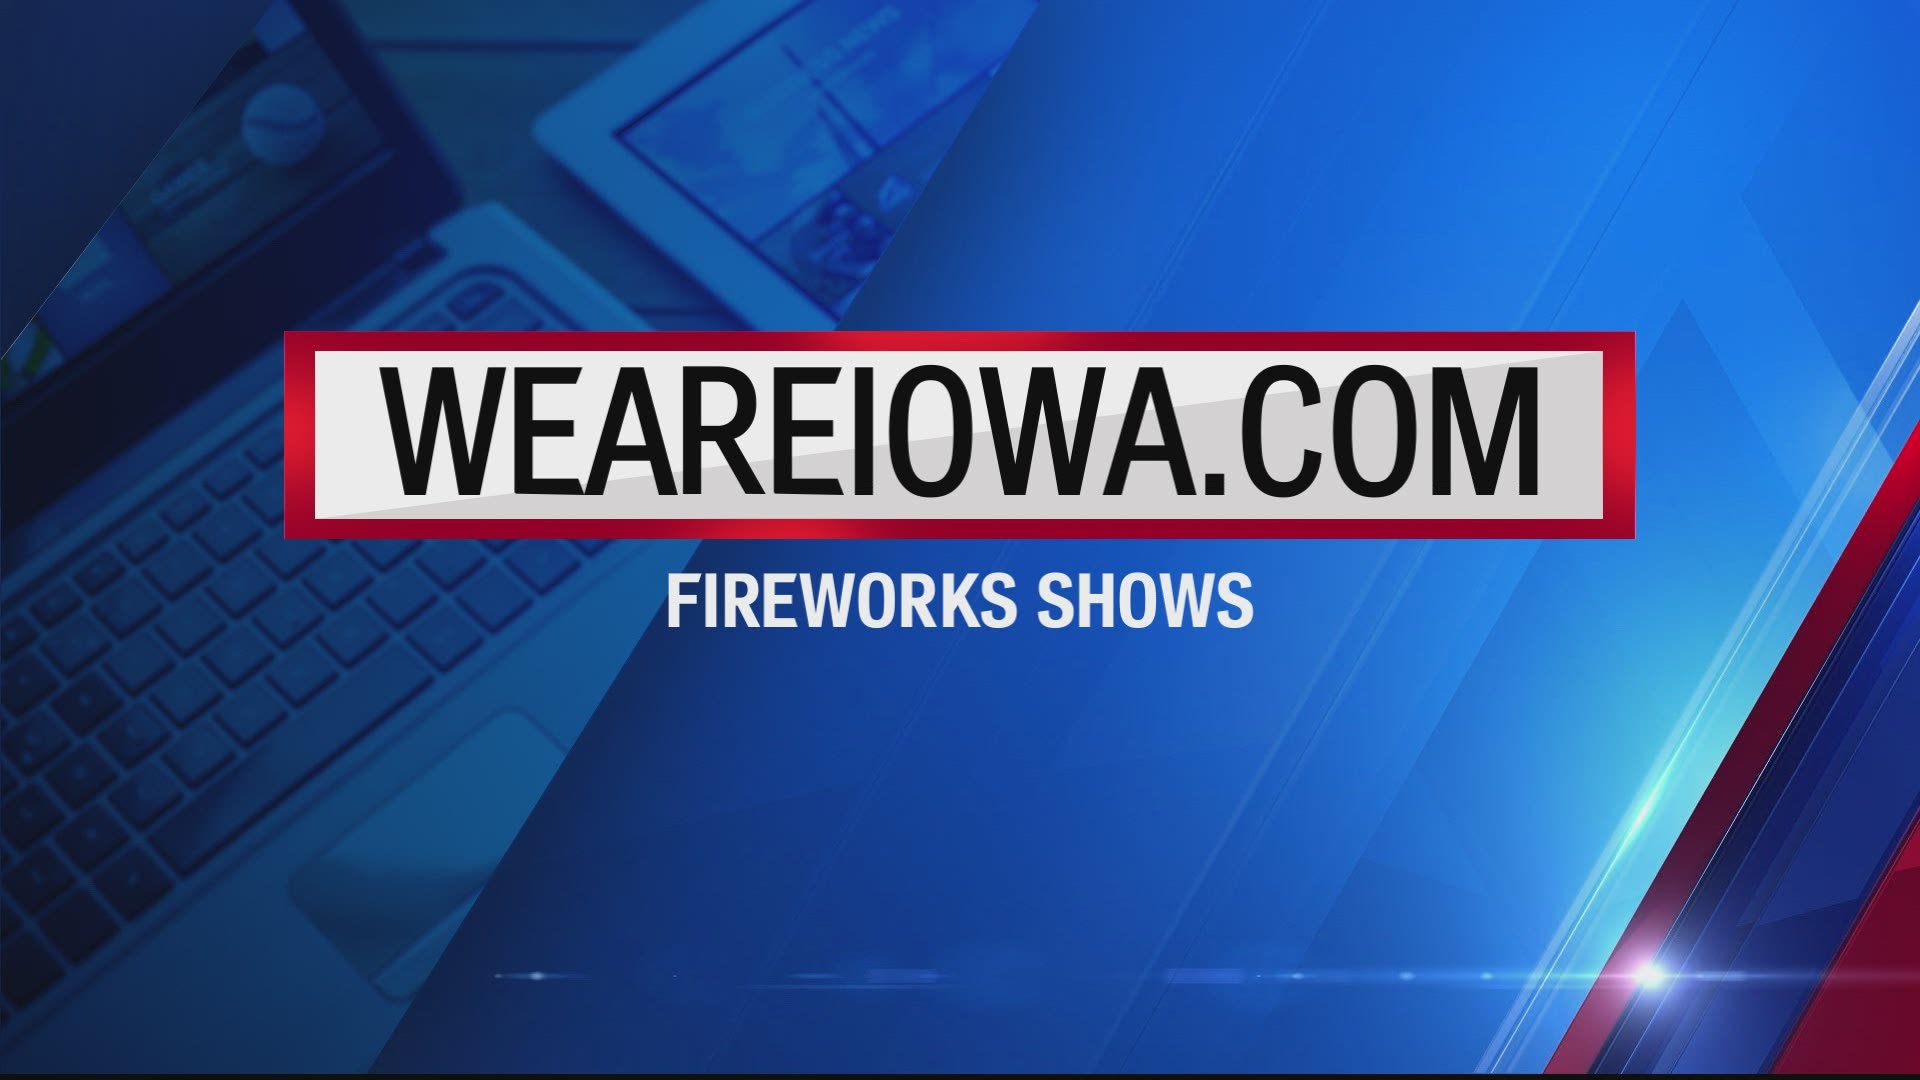 Windsor Heights fireworks show for the 4th of July is postponed because of COVID-19 worries.